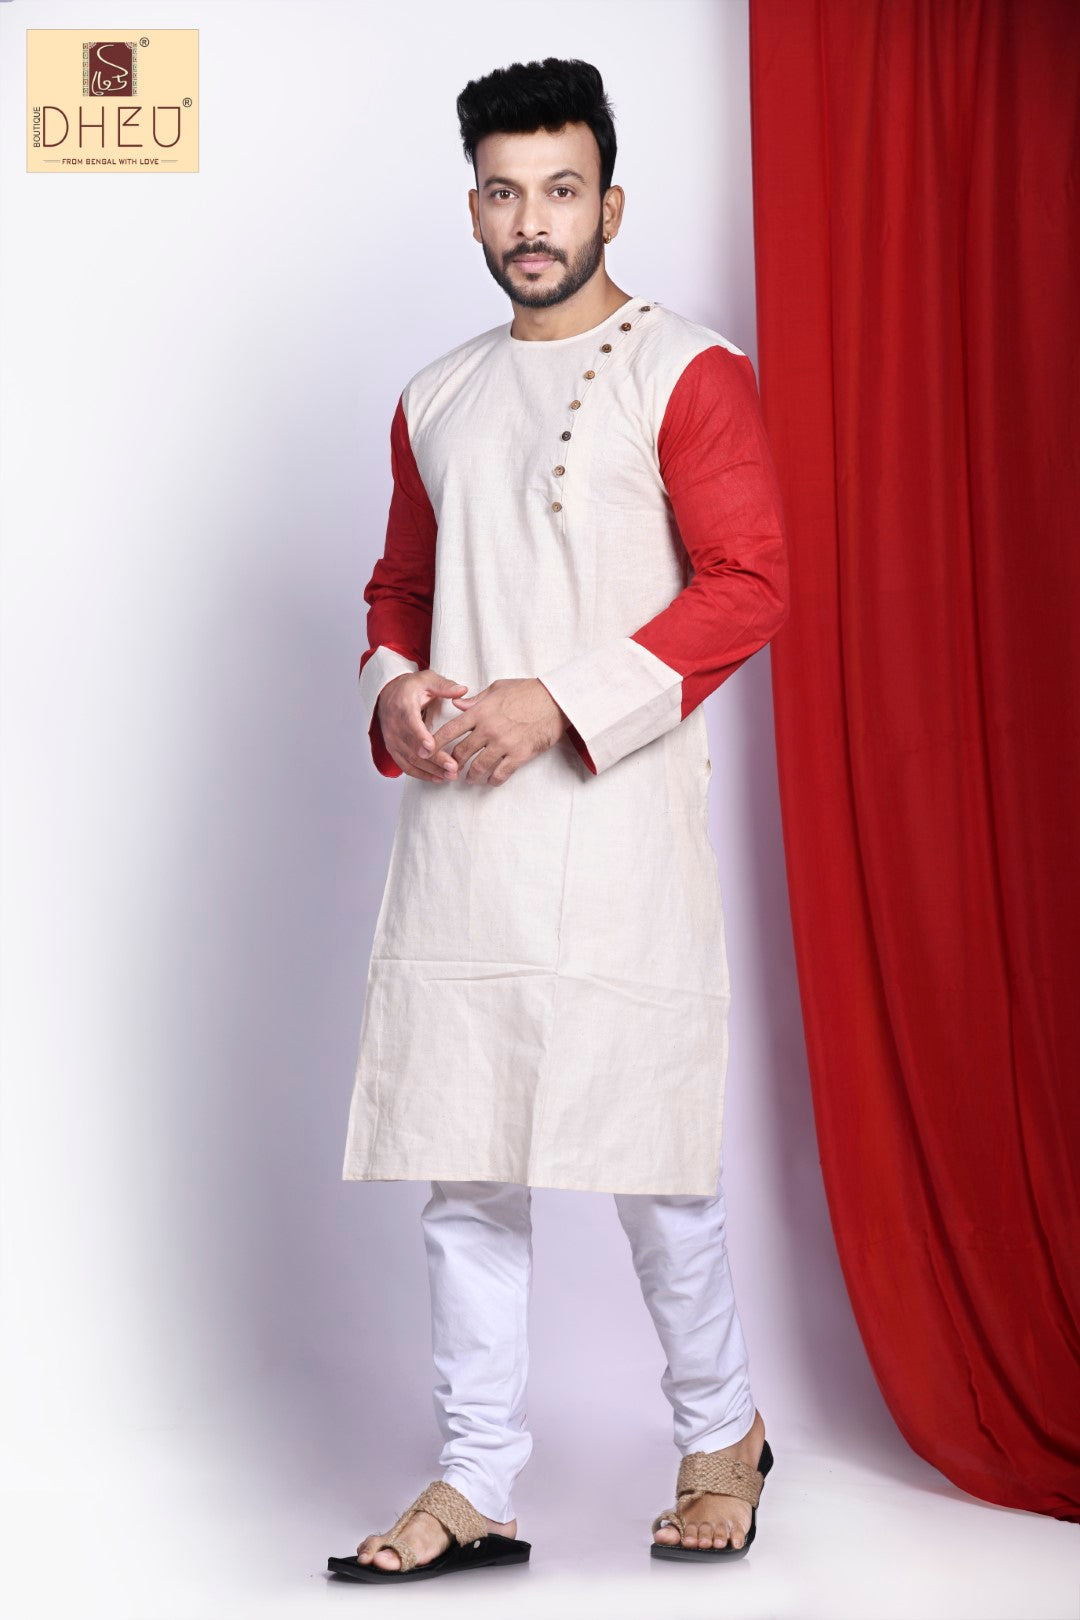 Vibrant red-white designer kurta at low cost in dheu.in